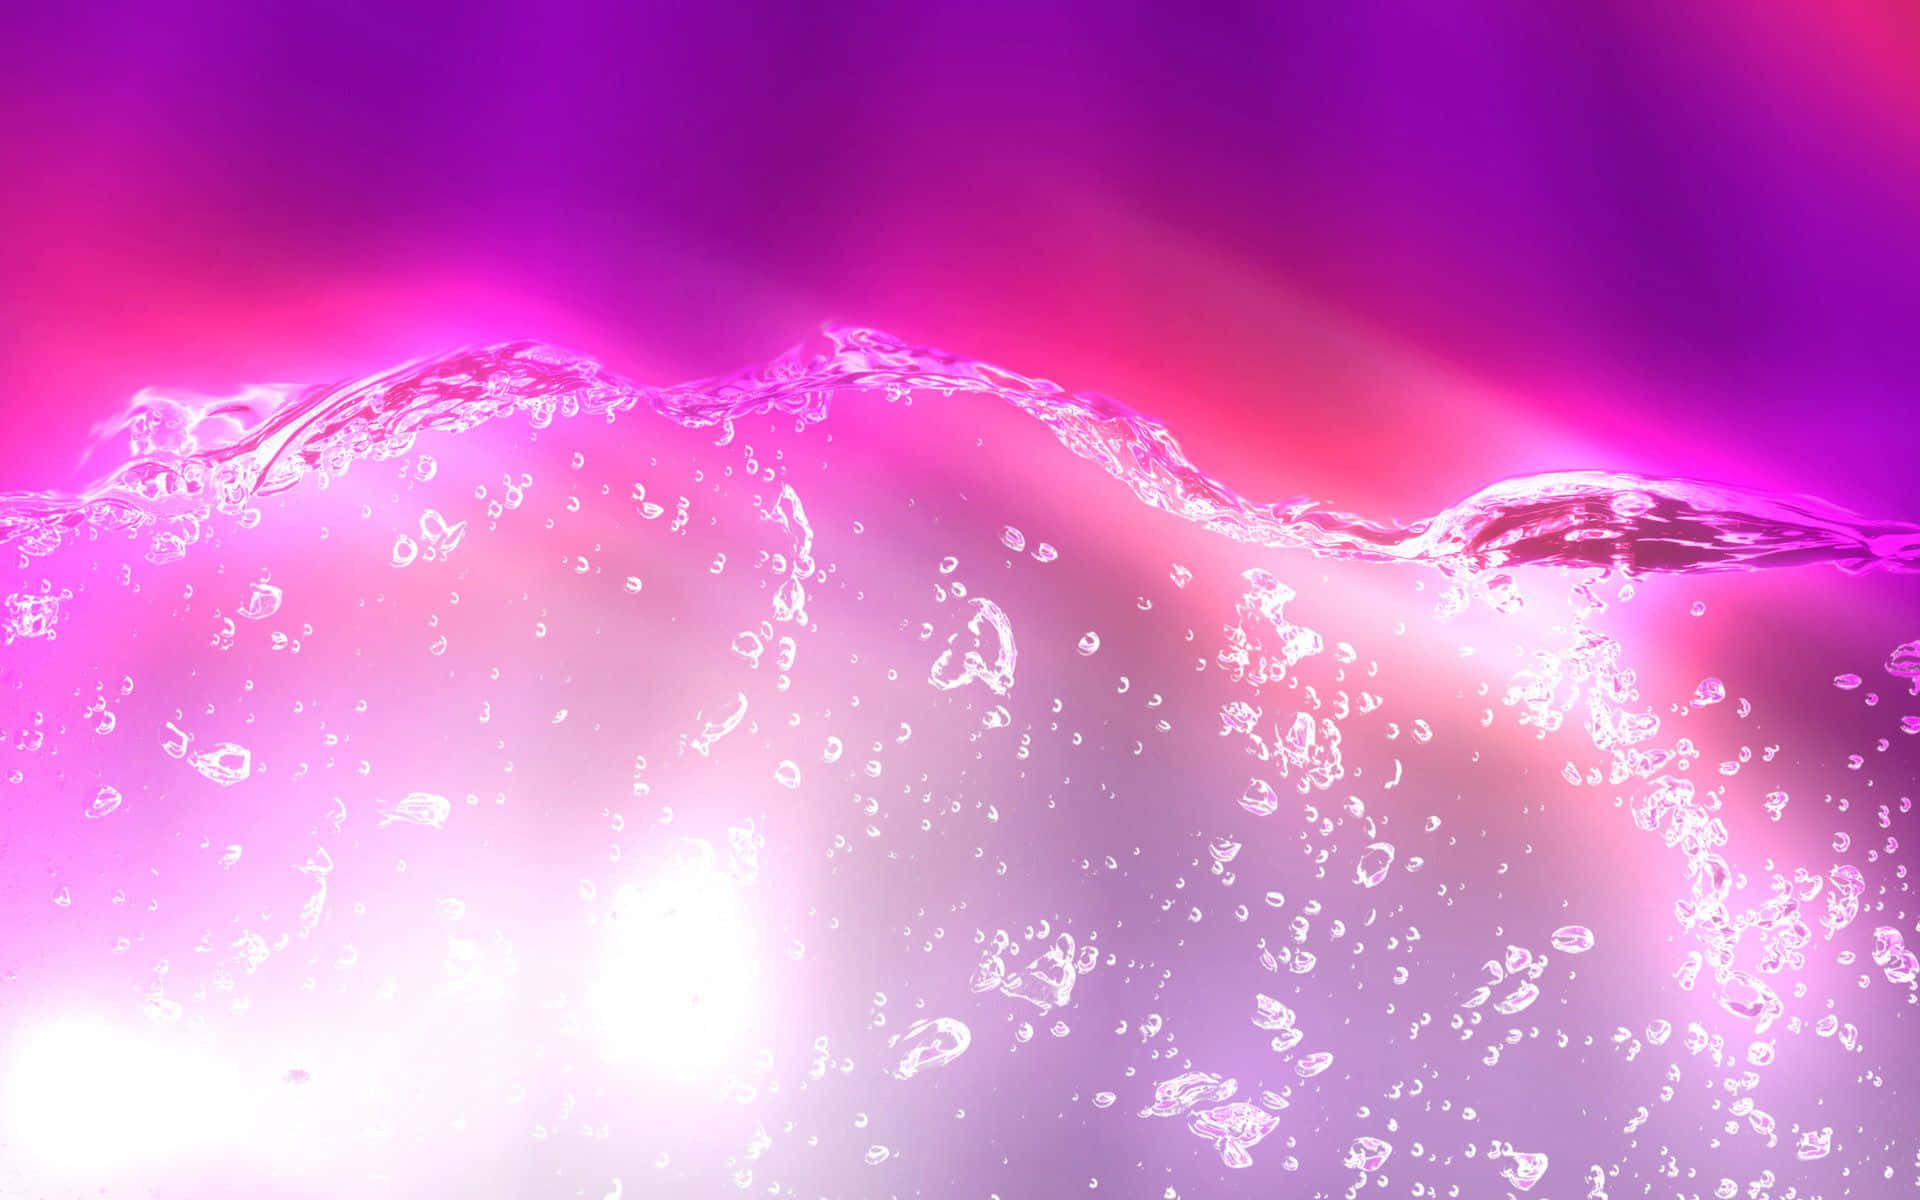 Image  A colorful pink abstract background